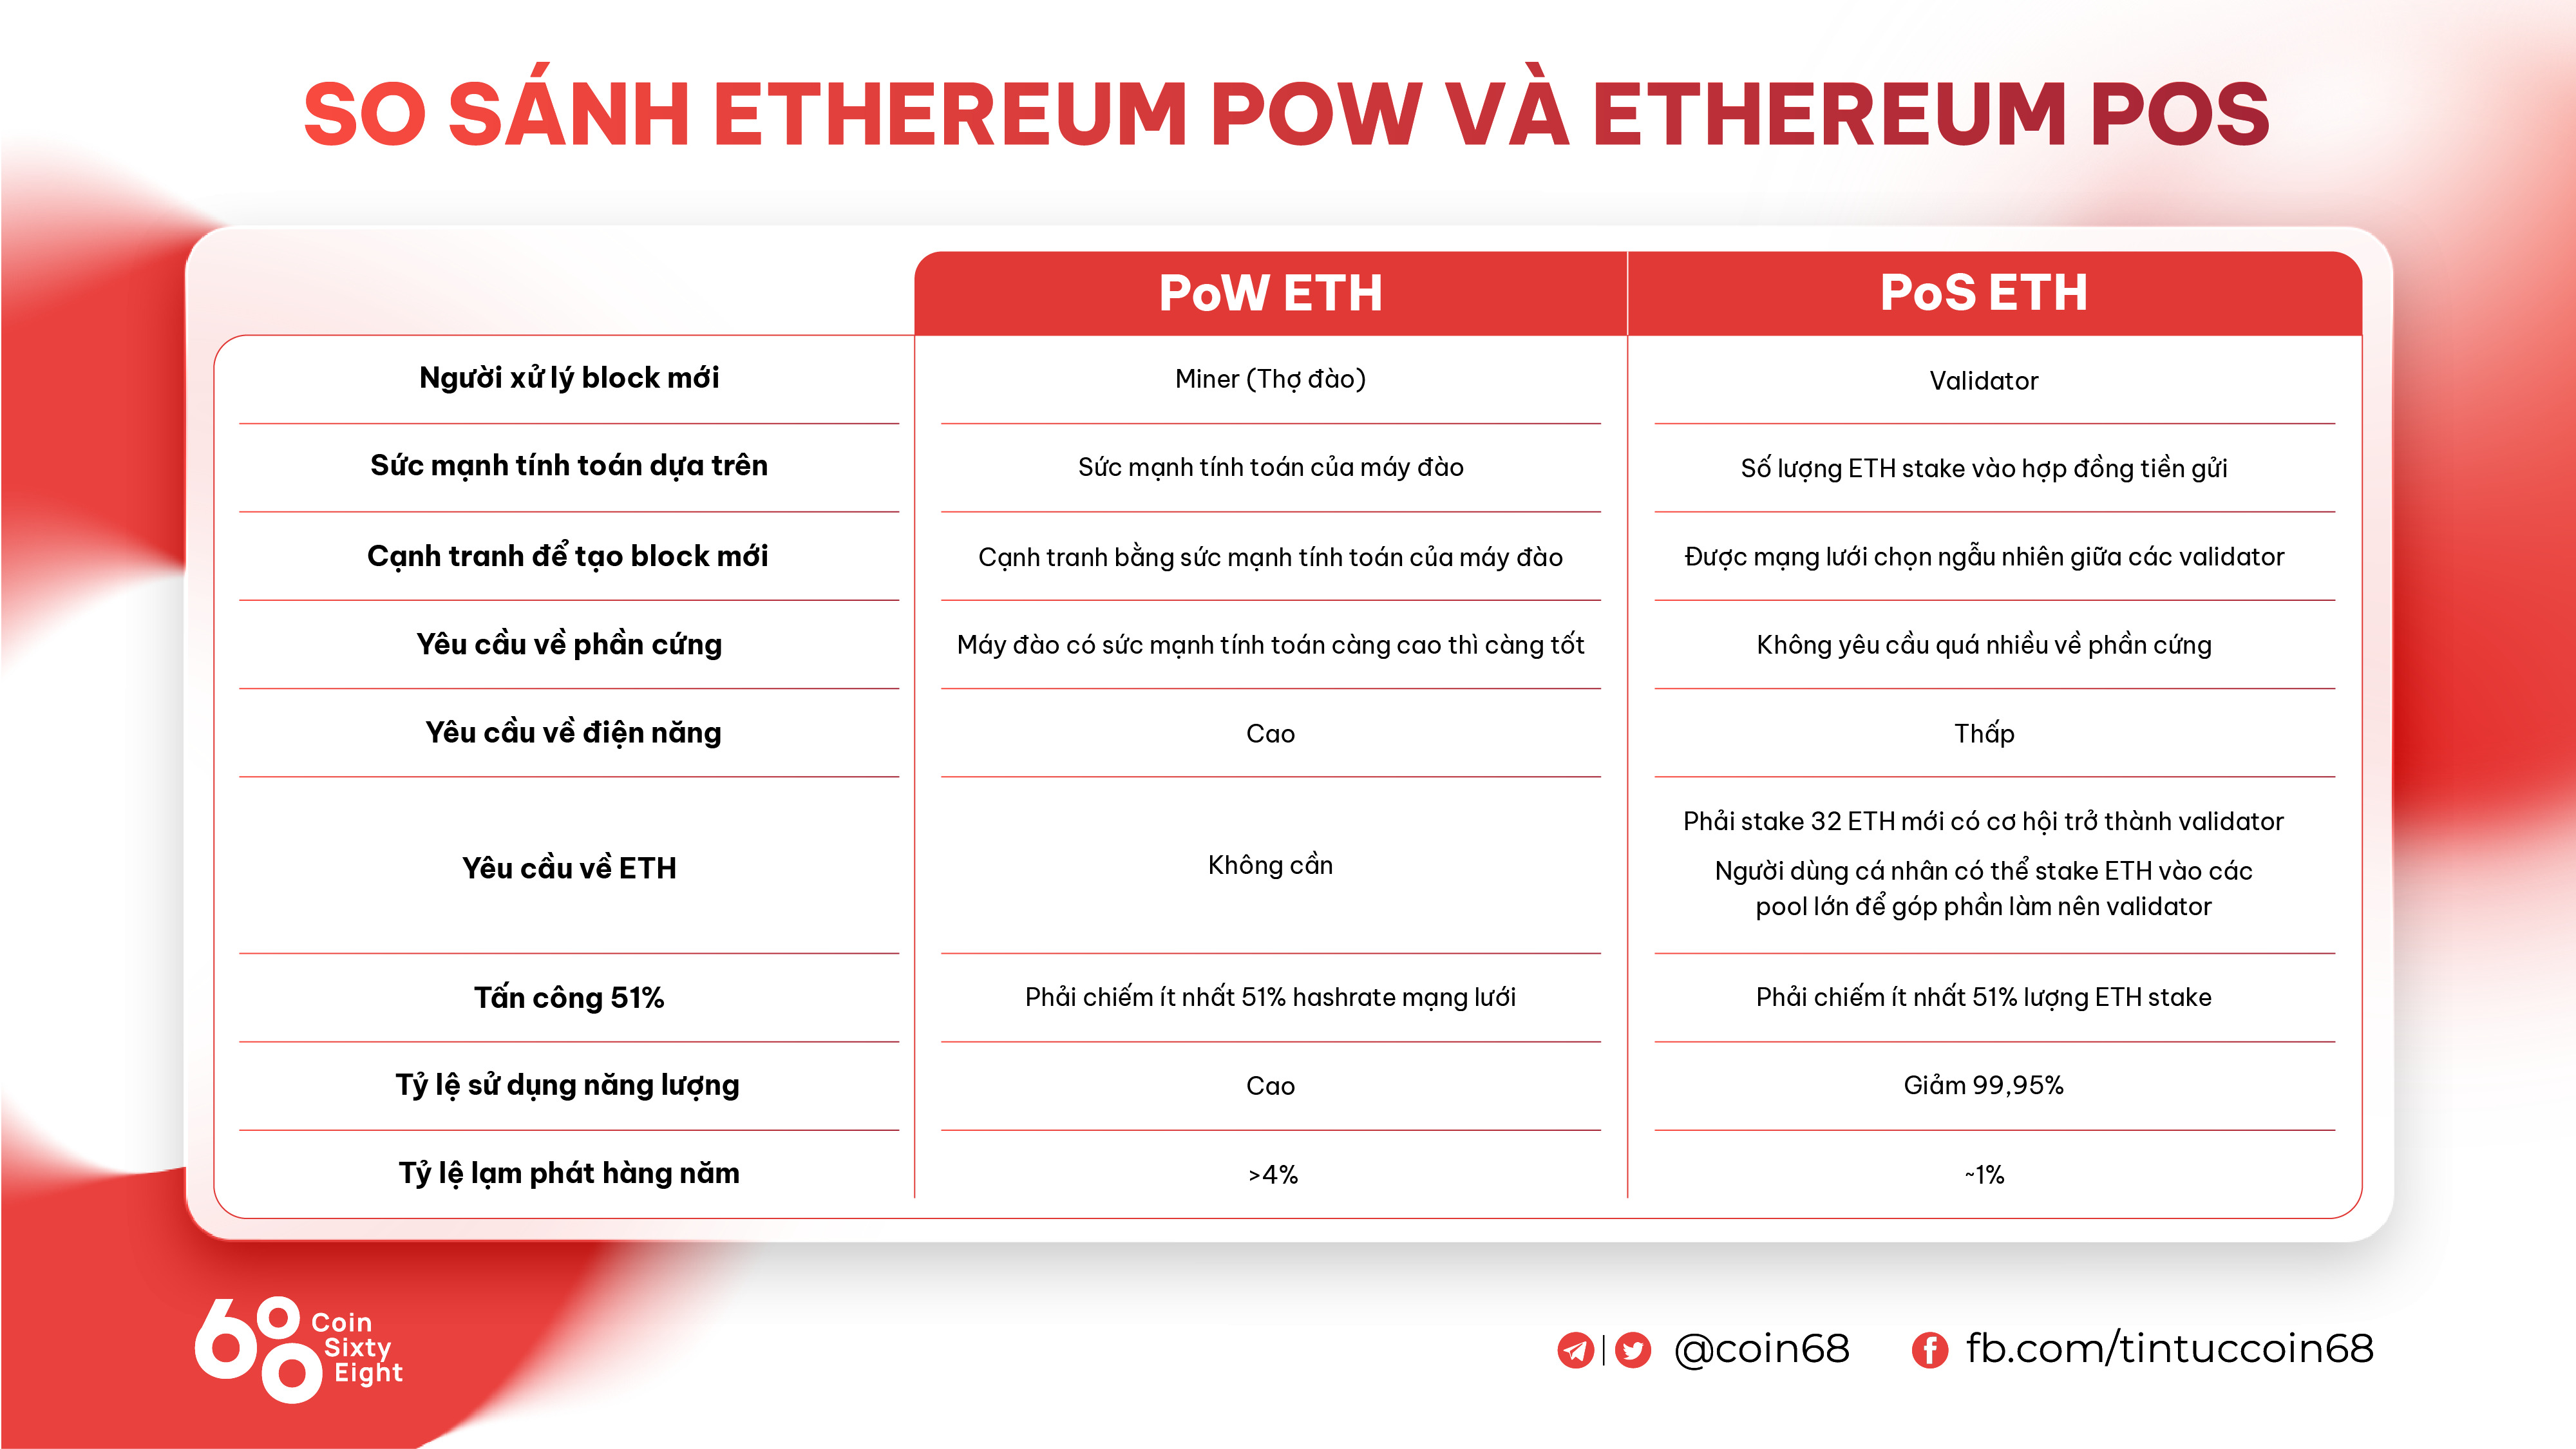 So Sánh Ethereum Proof-of-work Và Ethereum Proof-of-stake